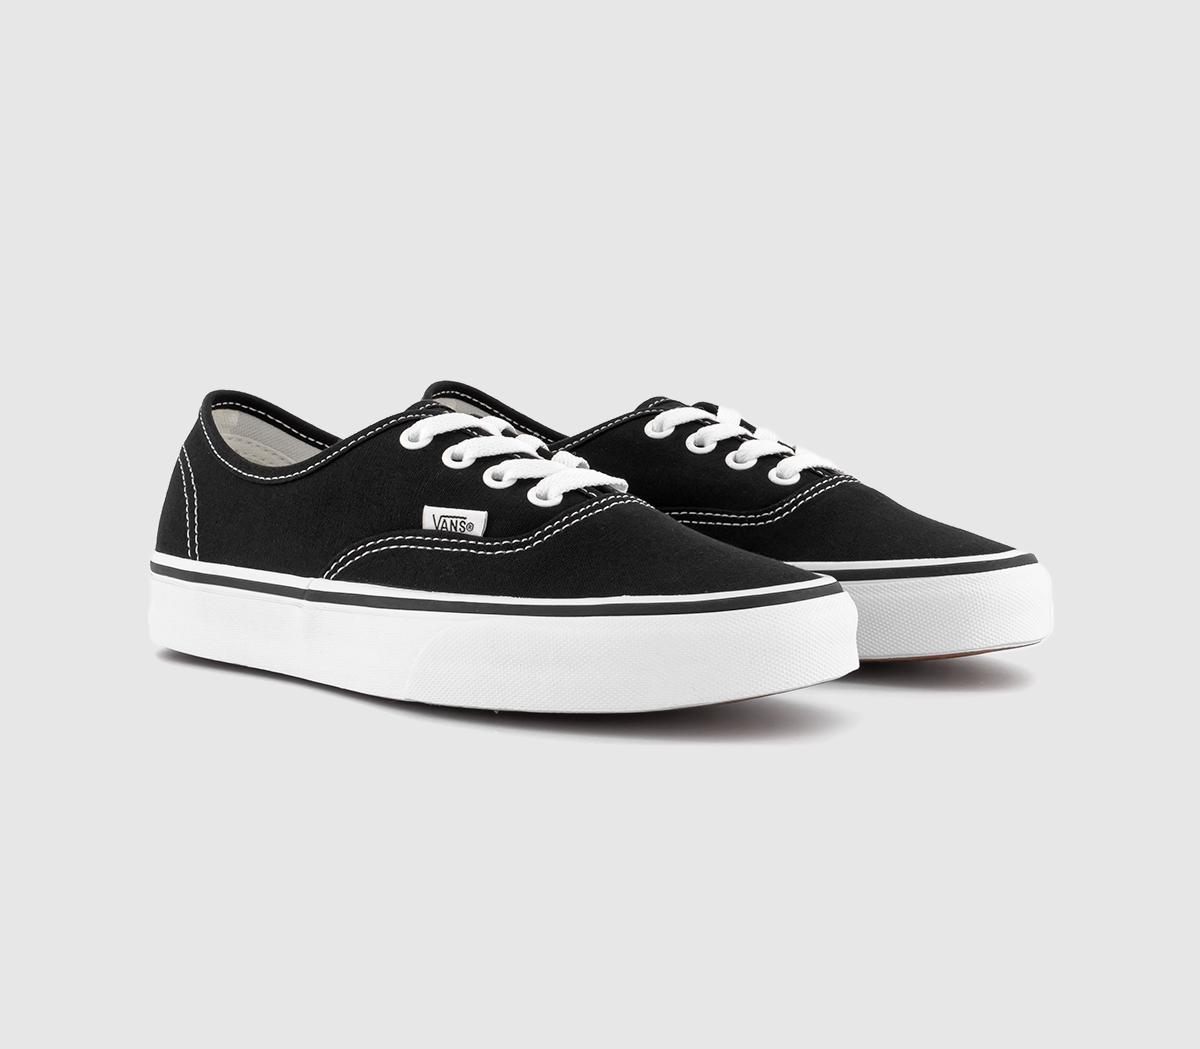 Vans Mens Authentic Trainers In Black And White, 10